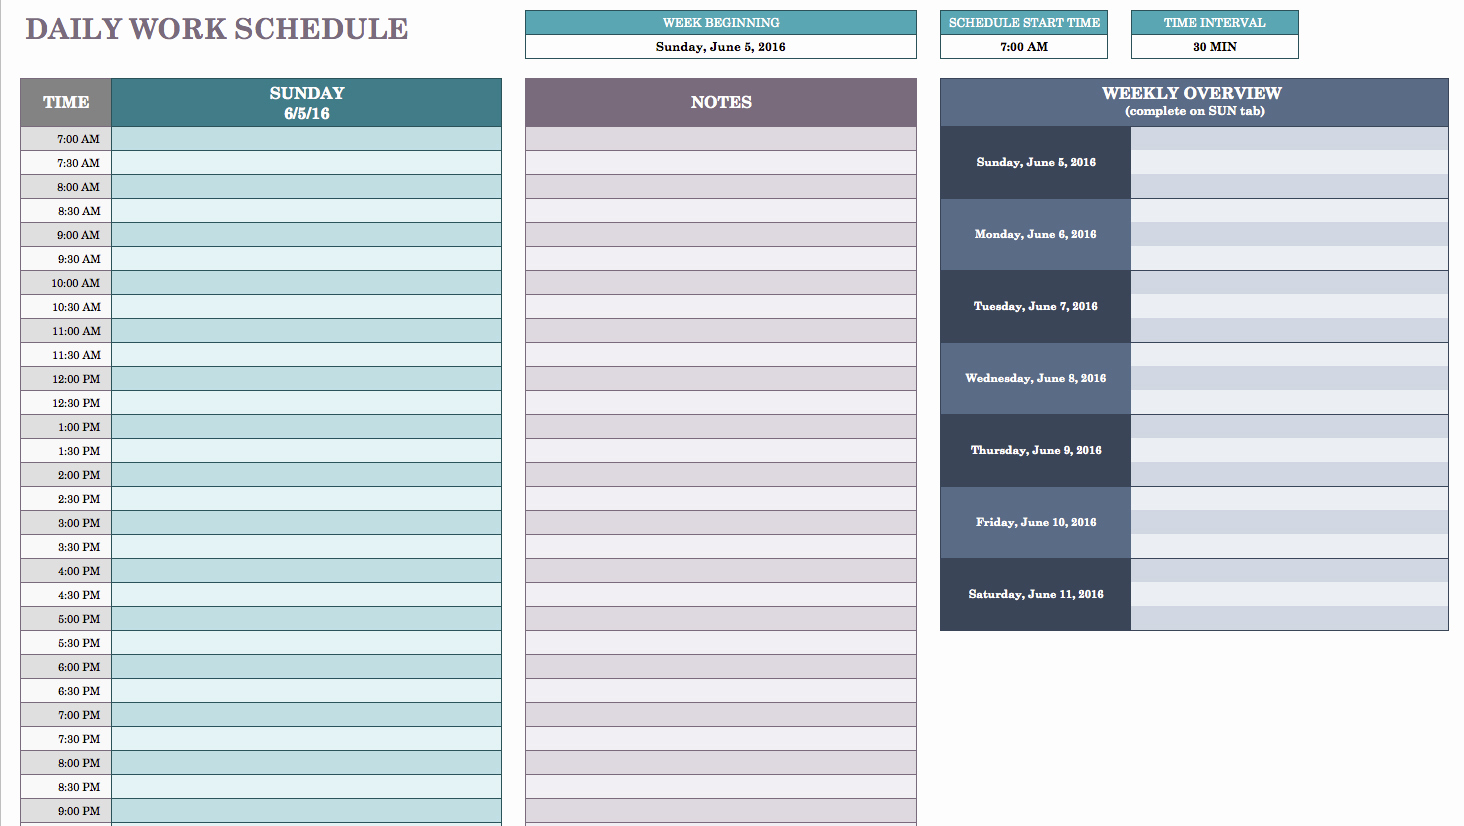 Daily Schedule Template Excel Awesome Free Daily Schedule Templates for Excel Smartsheet